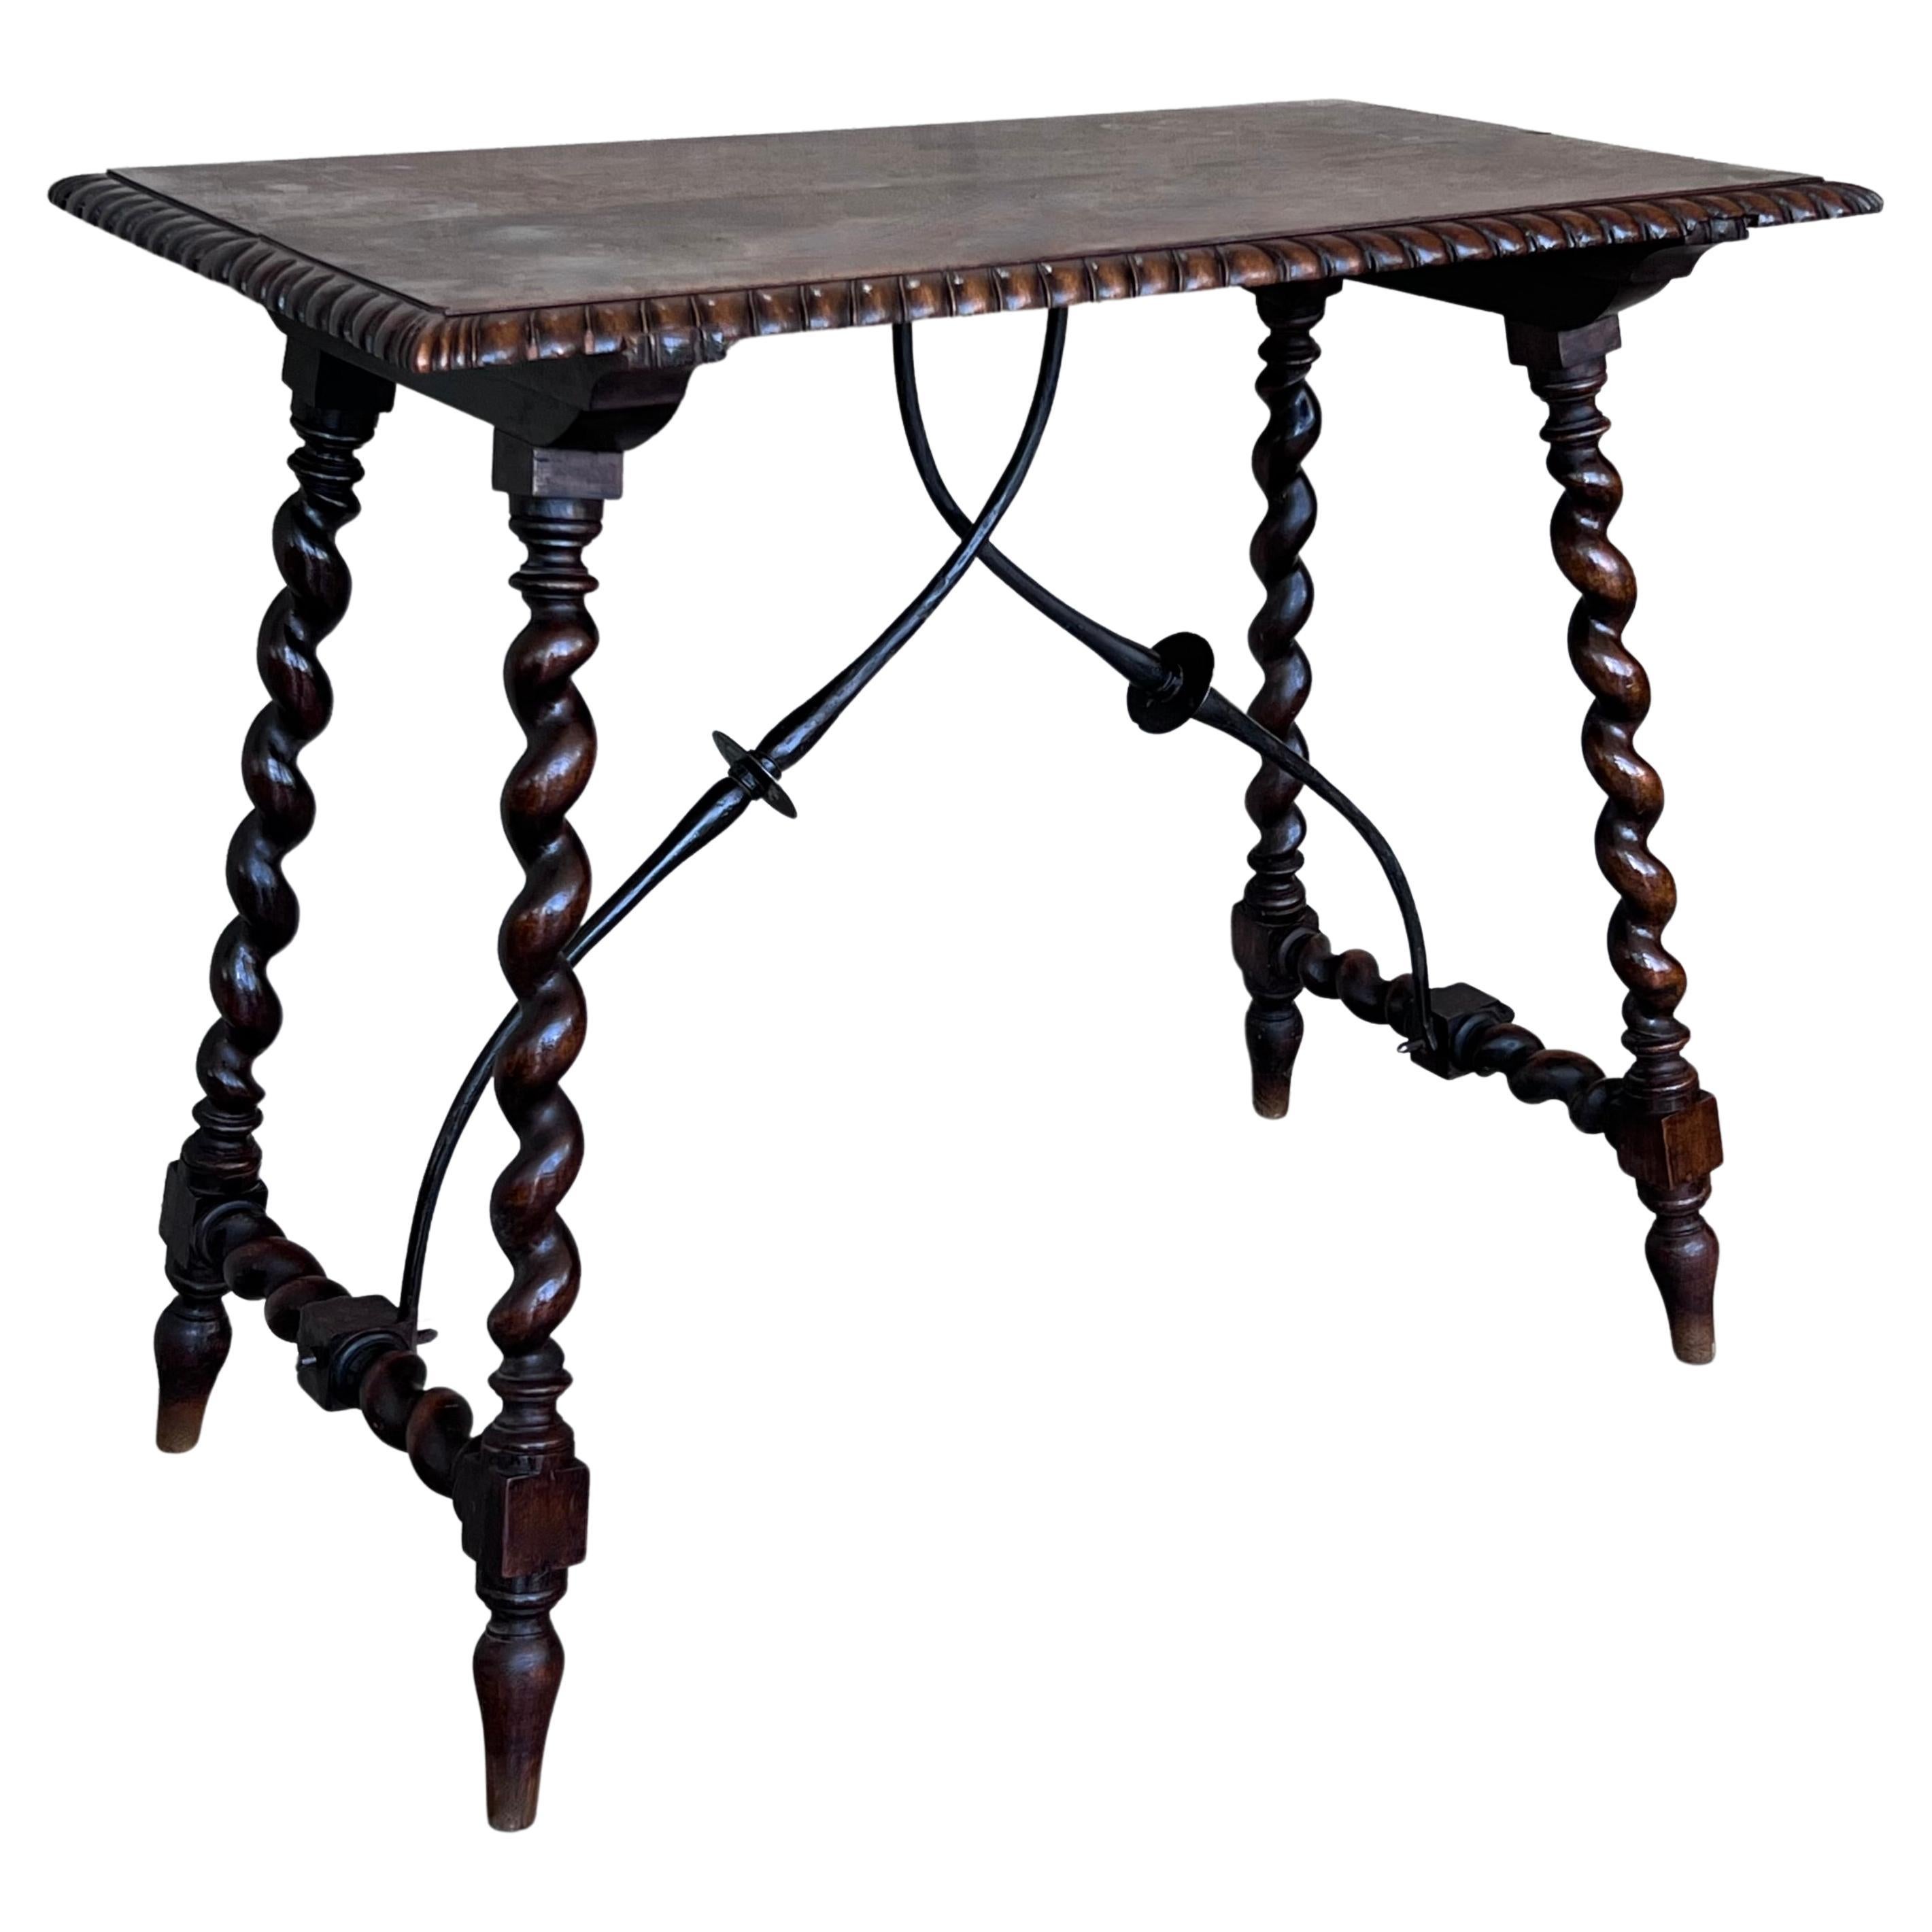 19th Spanish Side Table with Cared Turned Legs and Iron Stretcher